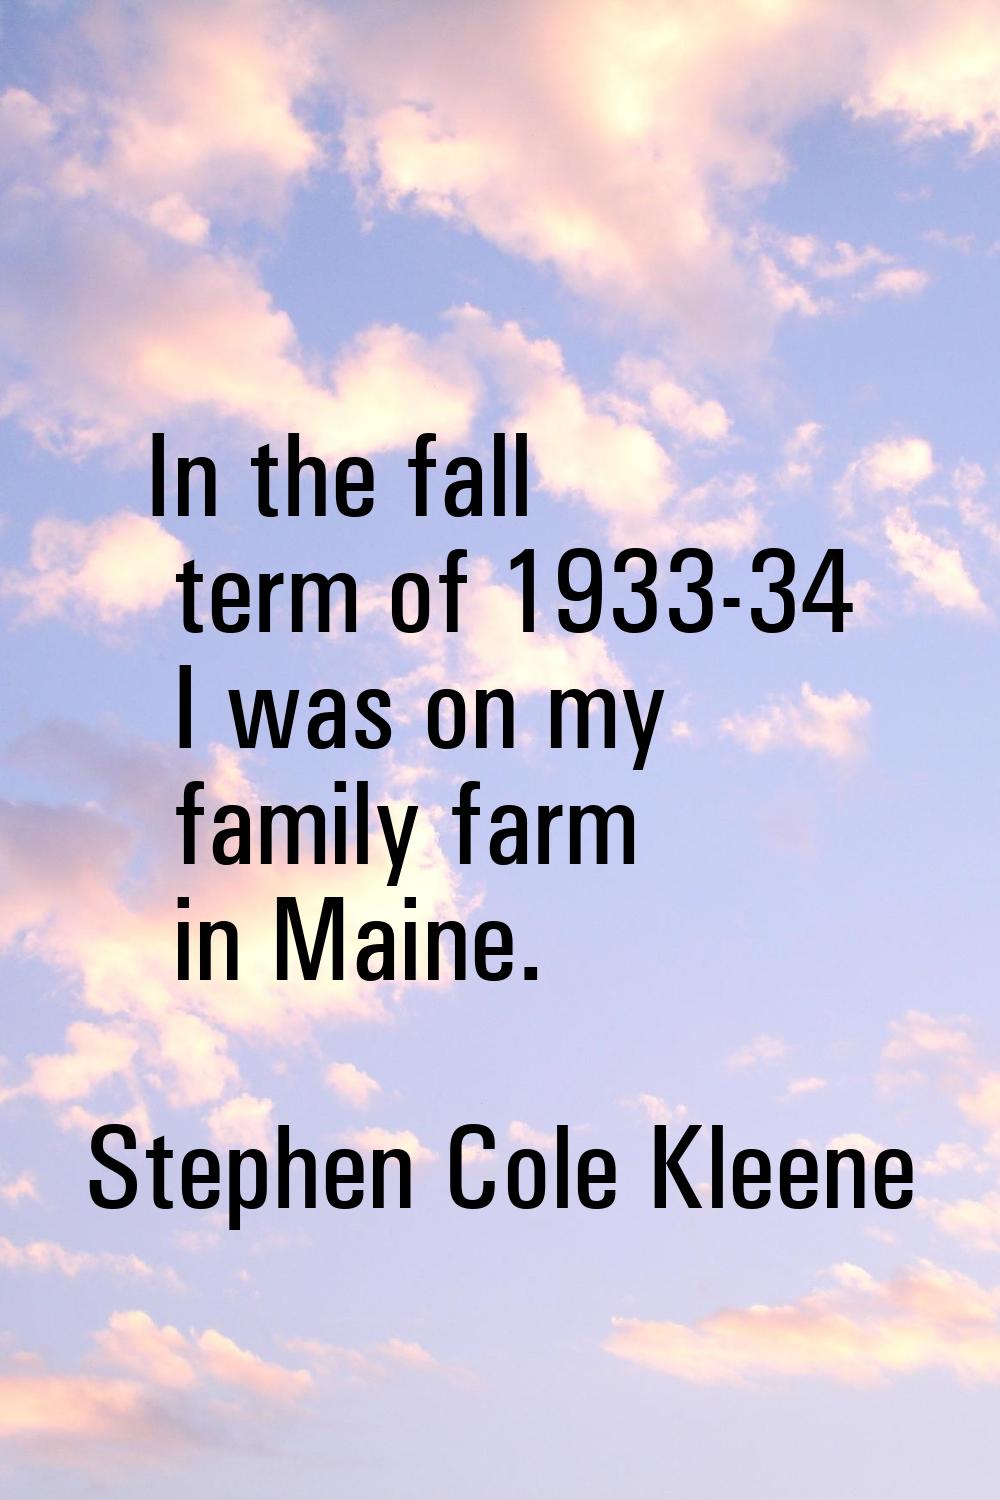 In the fall term of 1933-34 I was on my family farm in Maine.